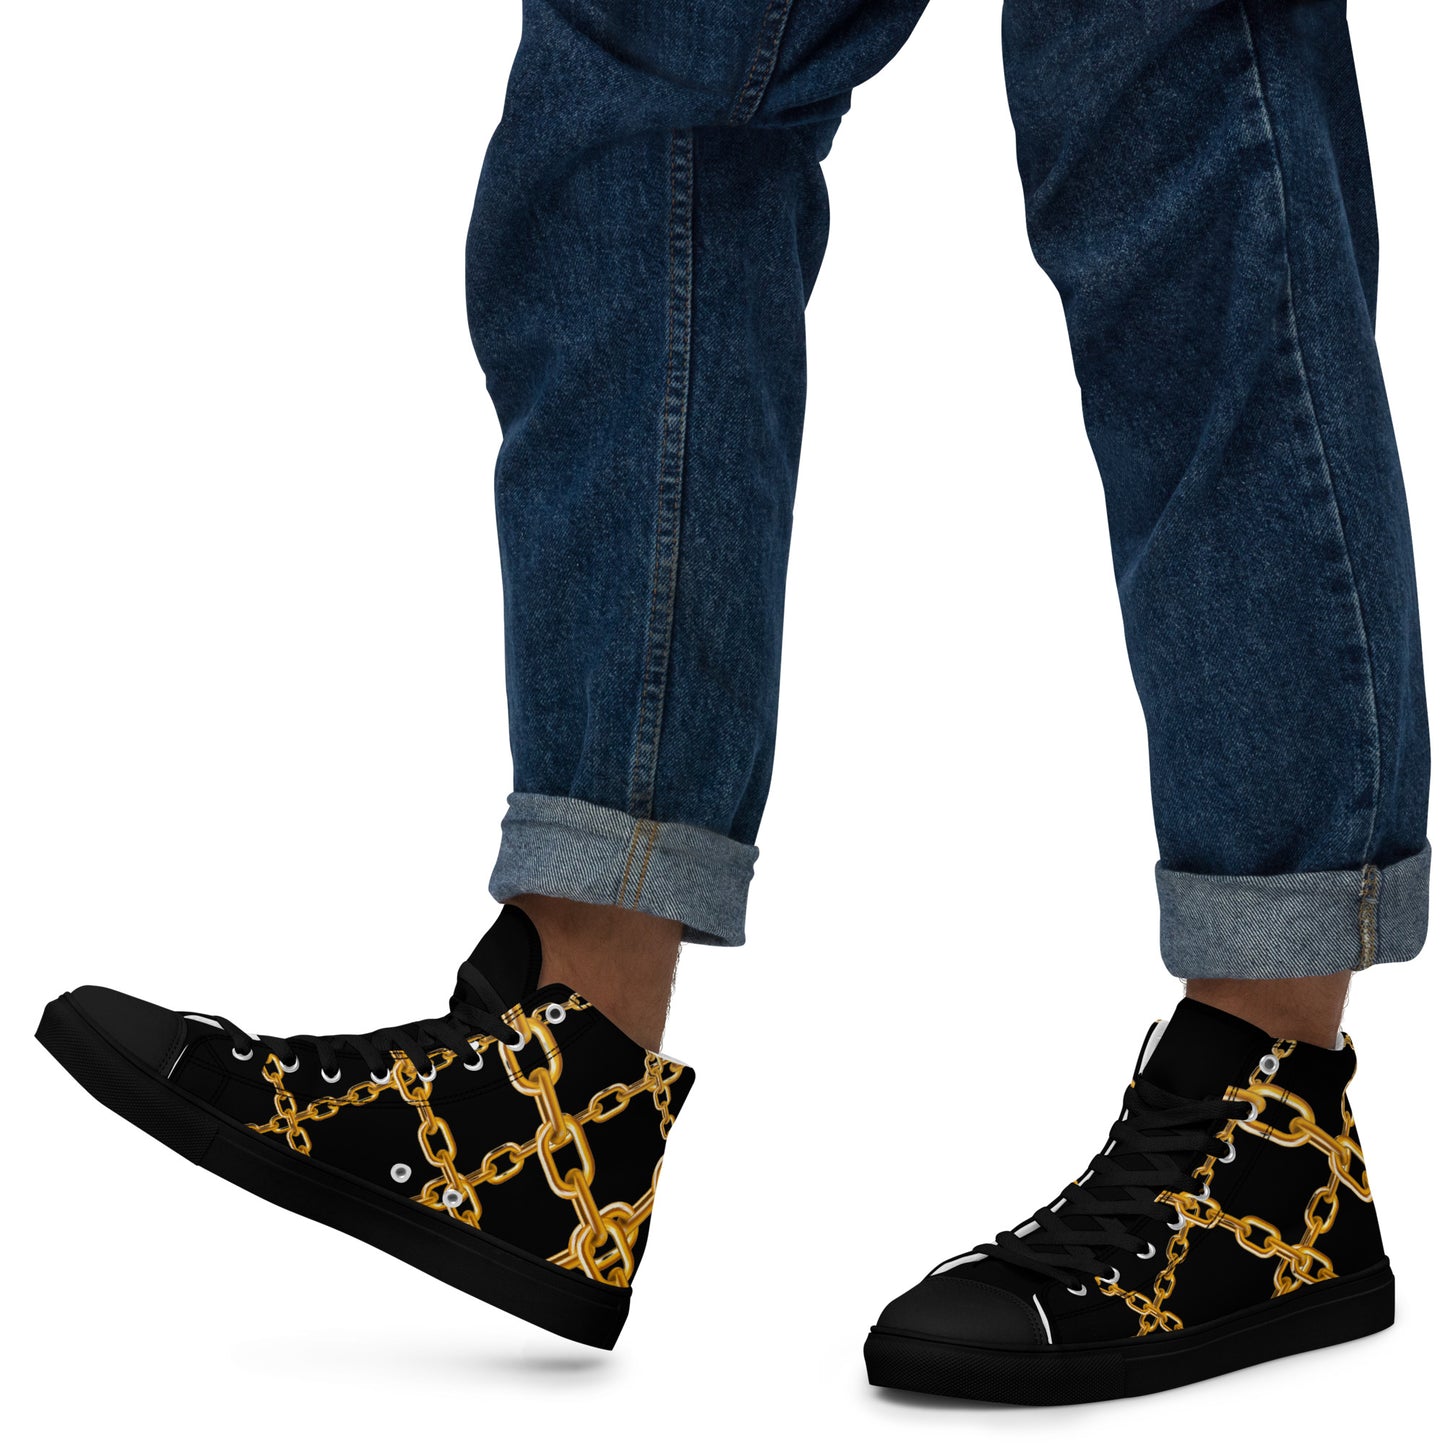 Steampunk Elegance: Black & Gold High Top Sneakers for Men - Unique Streetwear, Designer Canvas, Luxury Festival Footwear with Stylish Art Deco Chain Links